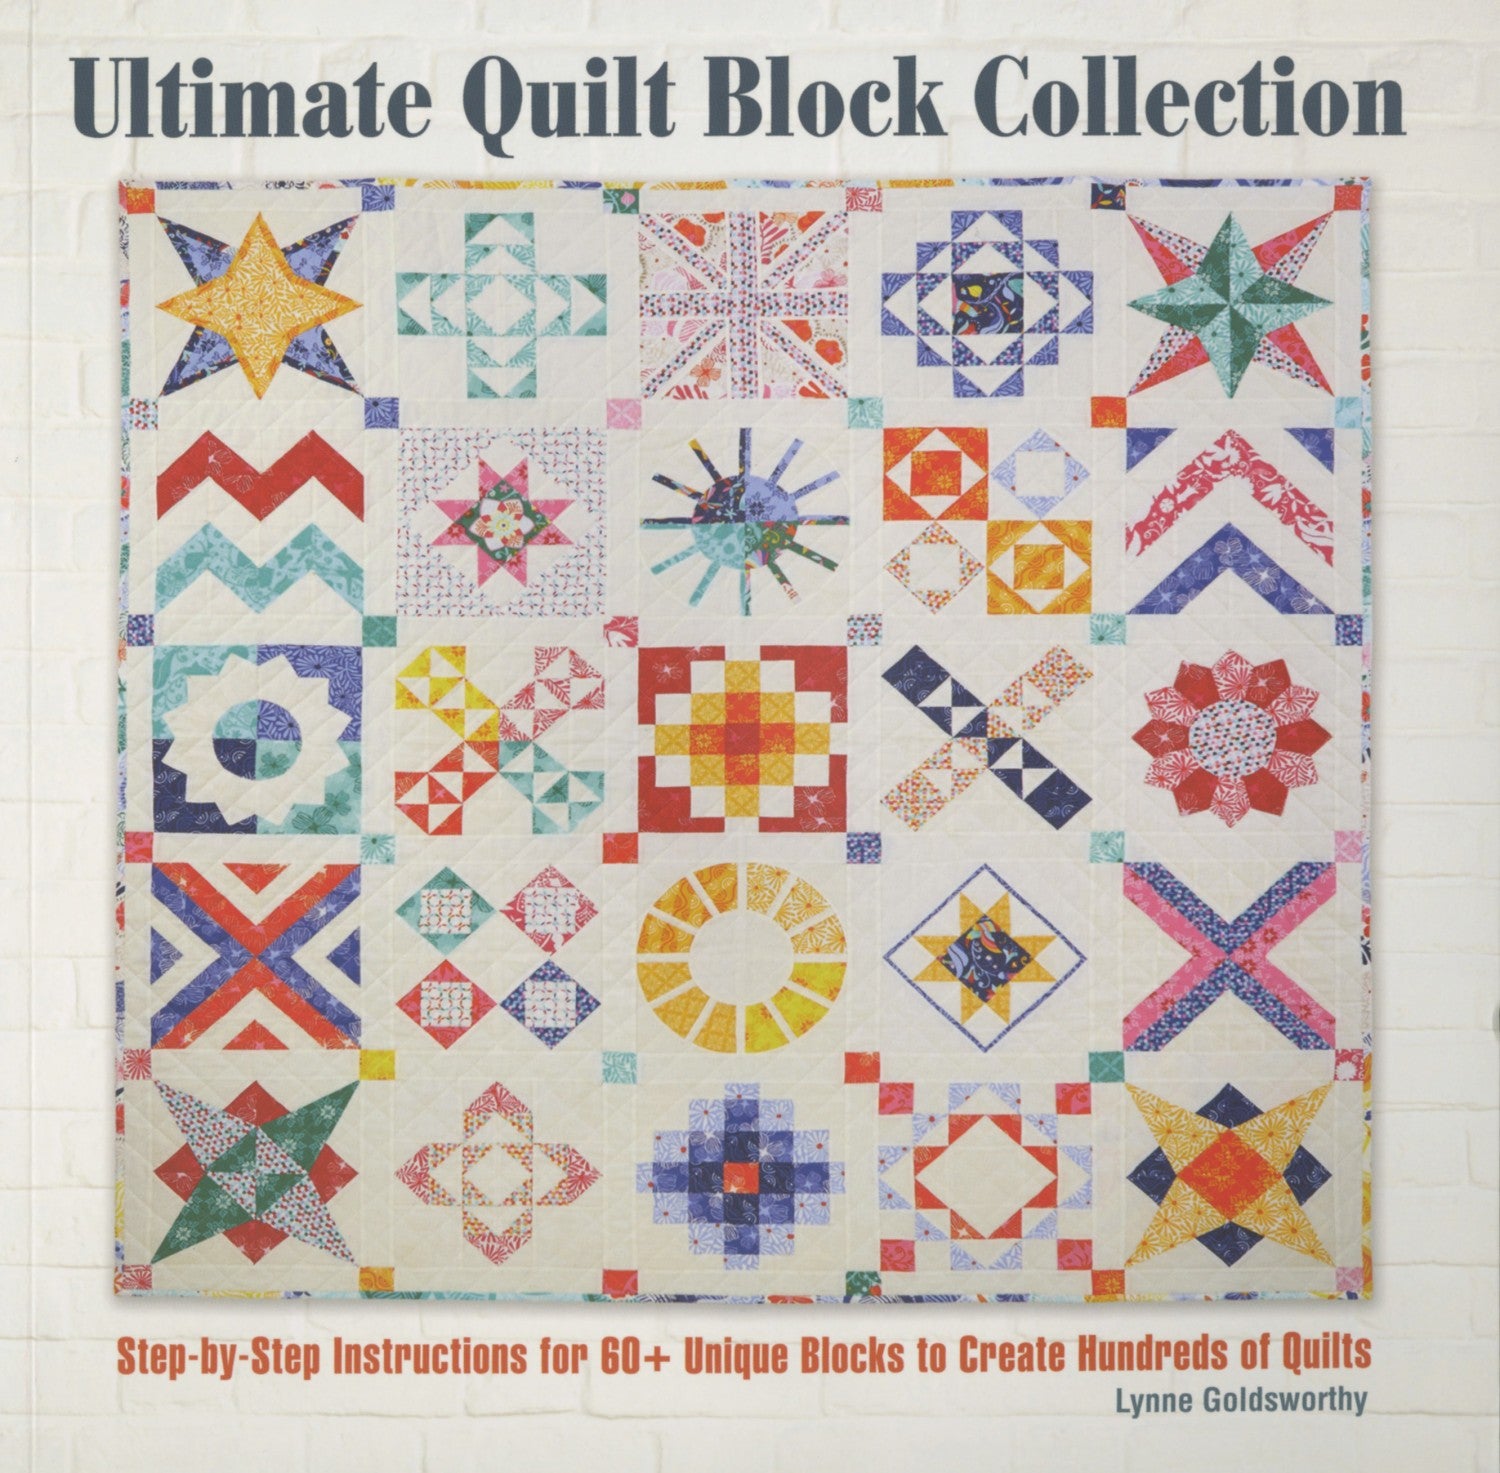 Ultimate Quilt Block Collection is a must have resource for quilters, featuring more than 70 original blocks from world renowned designers. From basic units like Flying Geese to more intricate motifs using foundation paper piecing, there's something here for every level of quilter. Mix and match classic and modern designs to make thunders of combinations. Lynn offers clear step by step instructions for every block with beautiful photos of every project. 